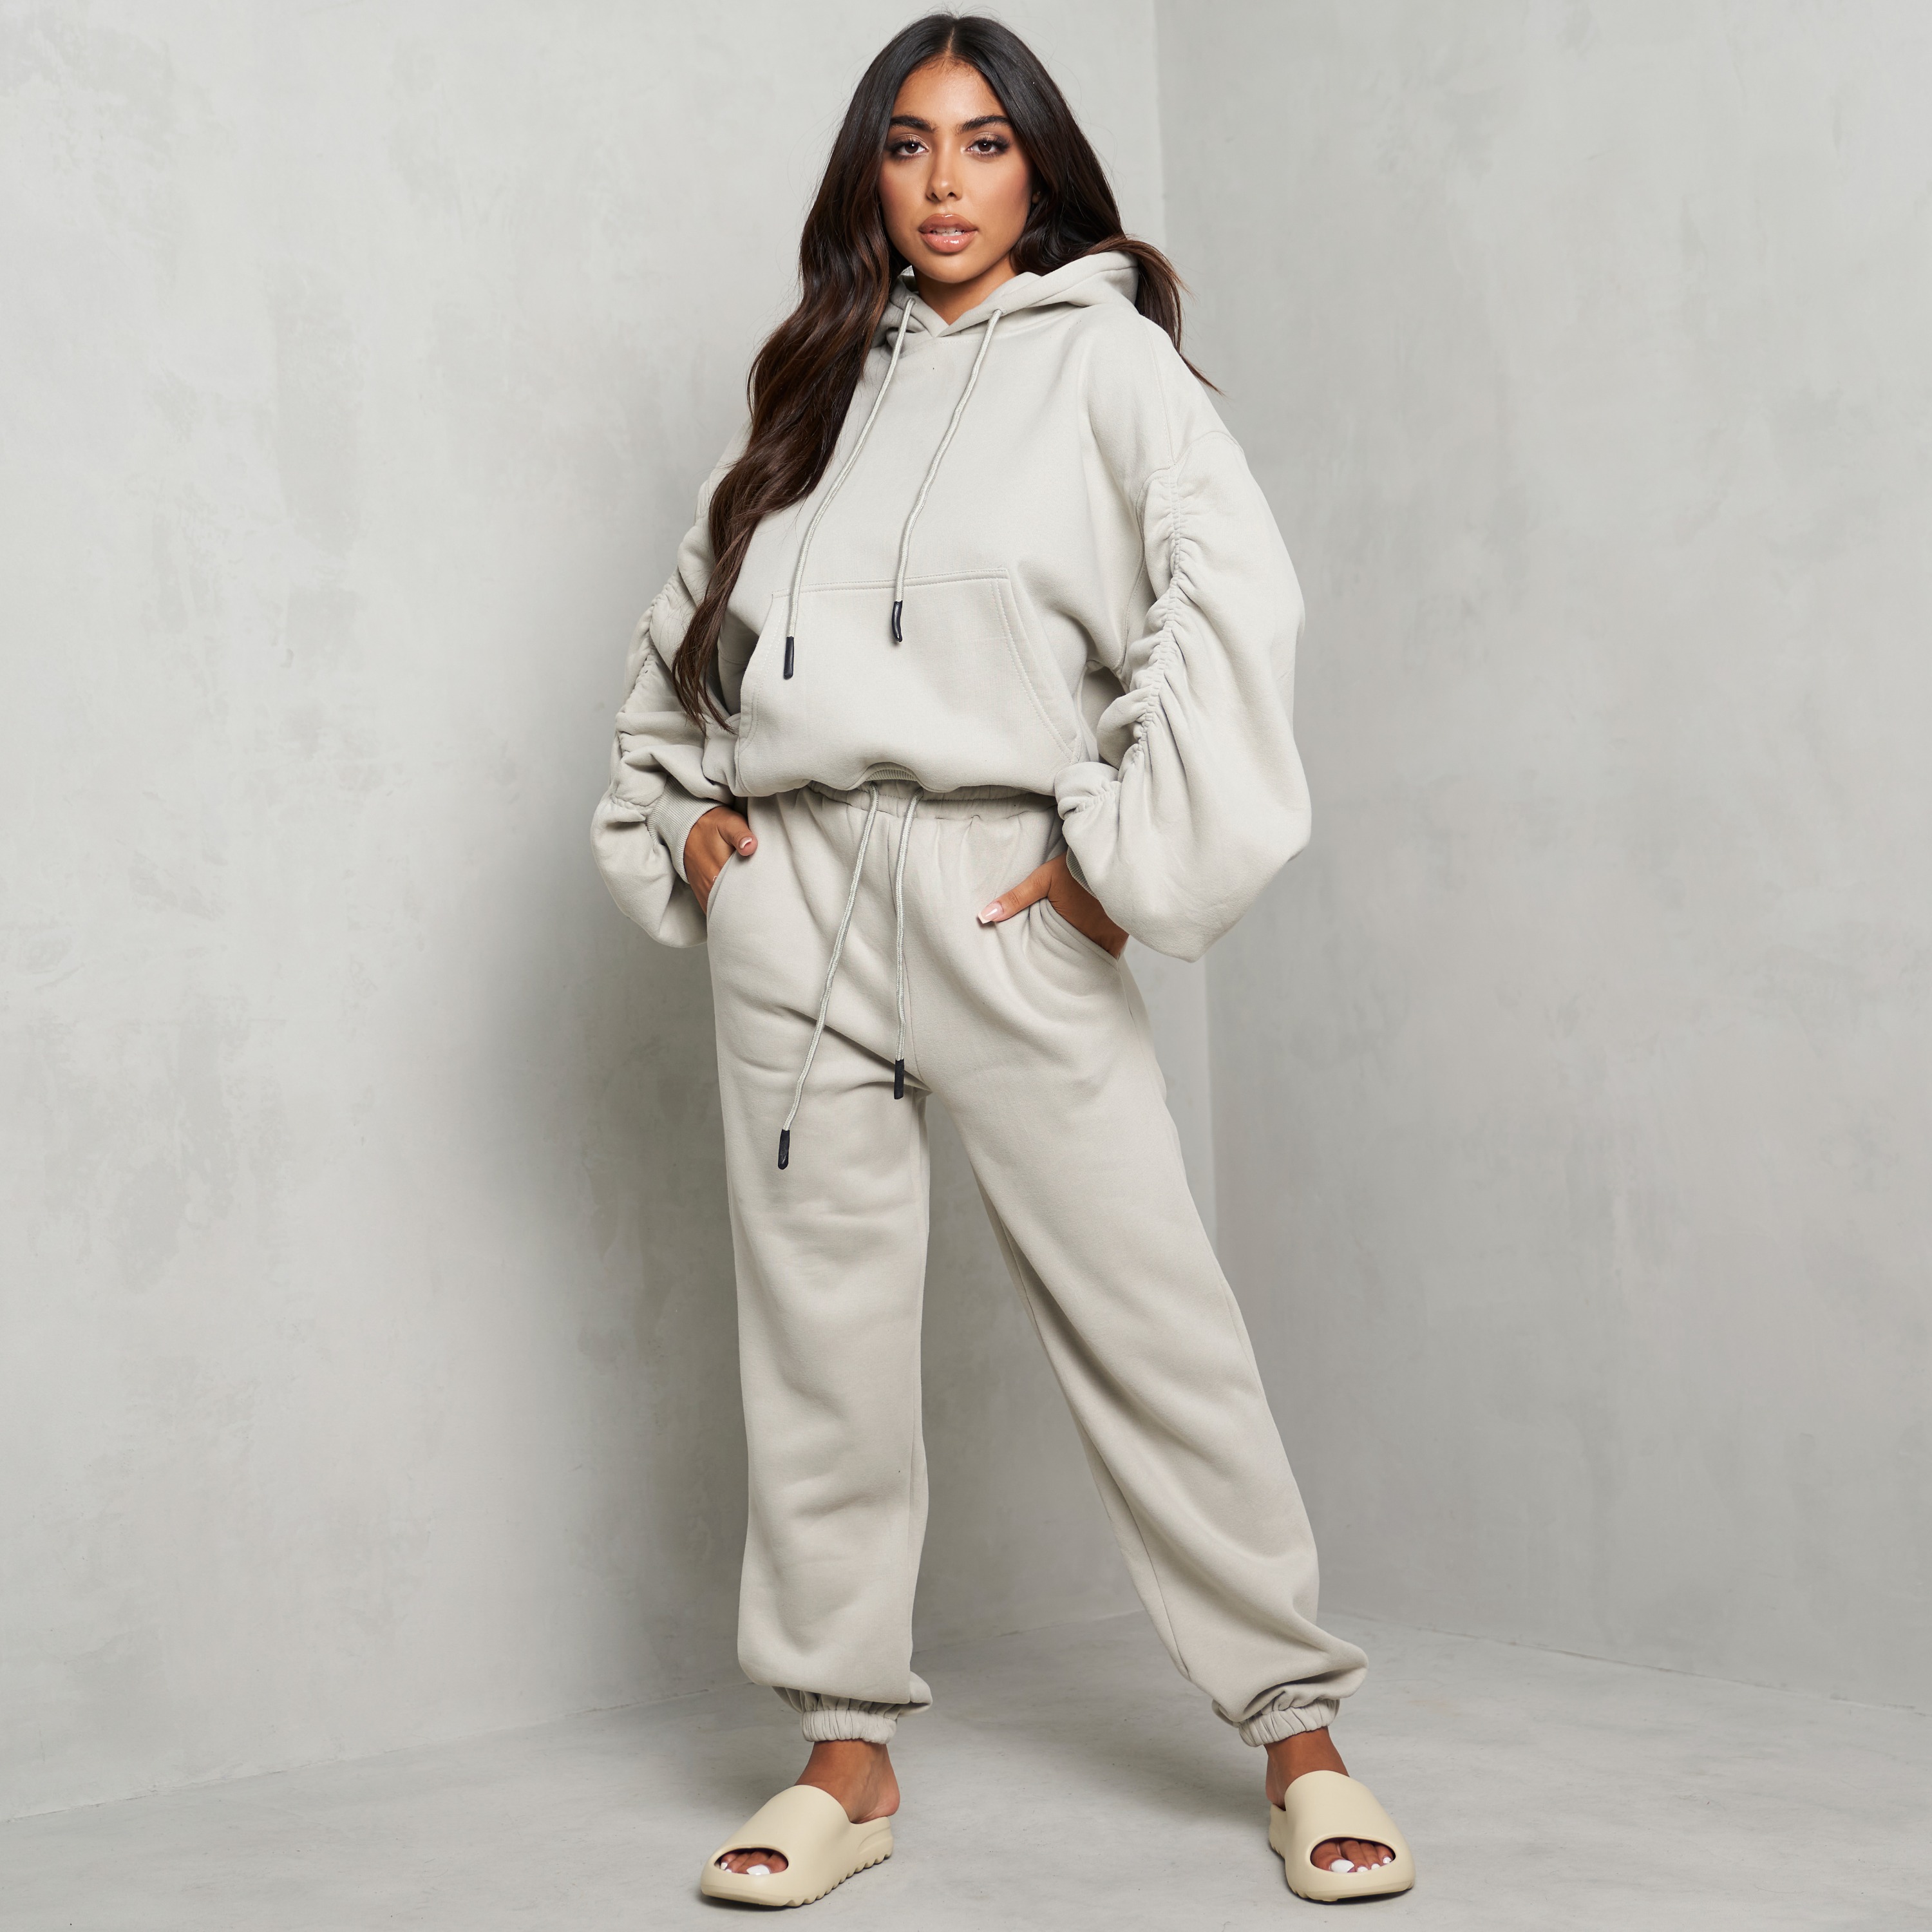 Ruched Sleeve Hoodie And Jogger Set In Grey UK Medium M, Grey